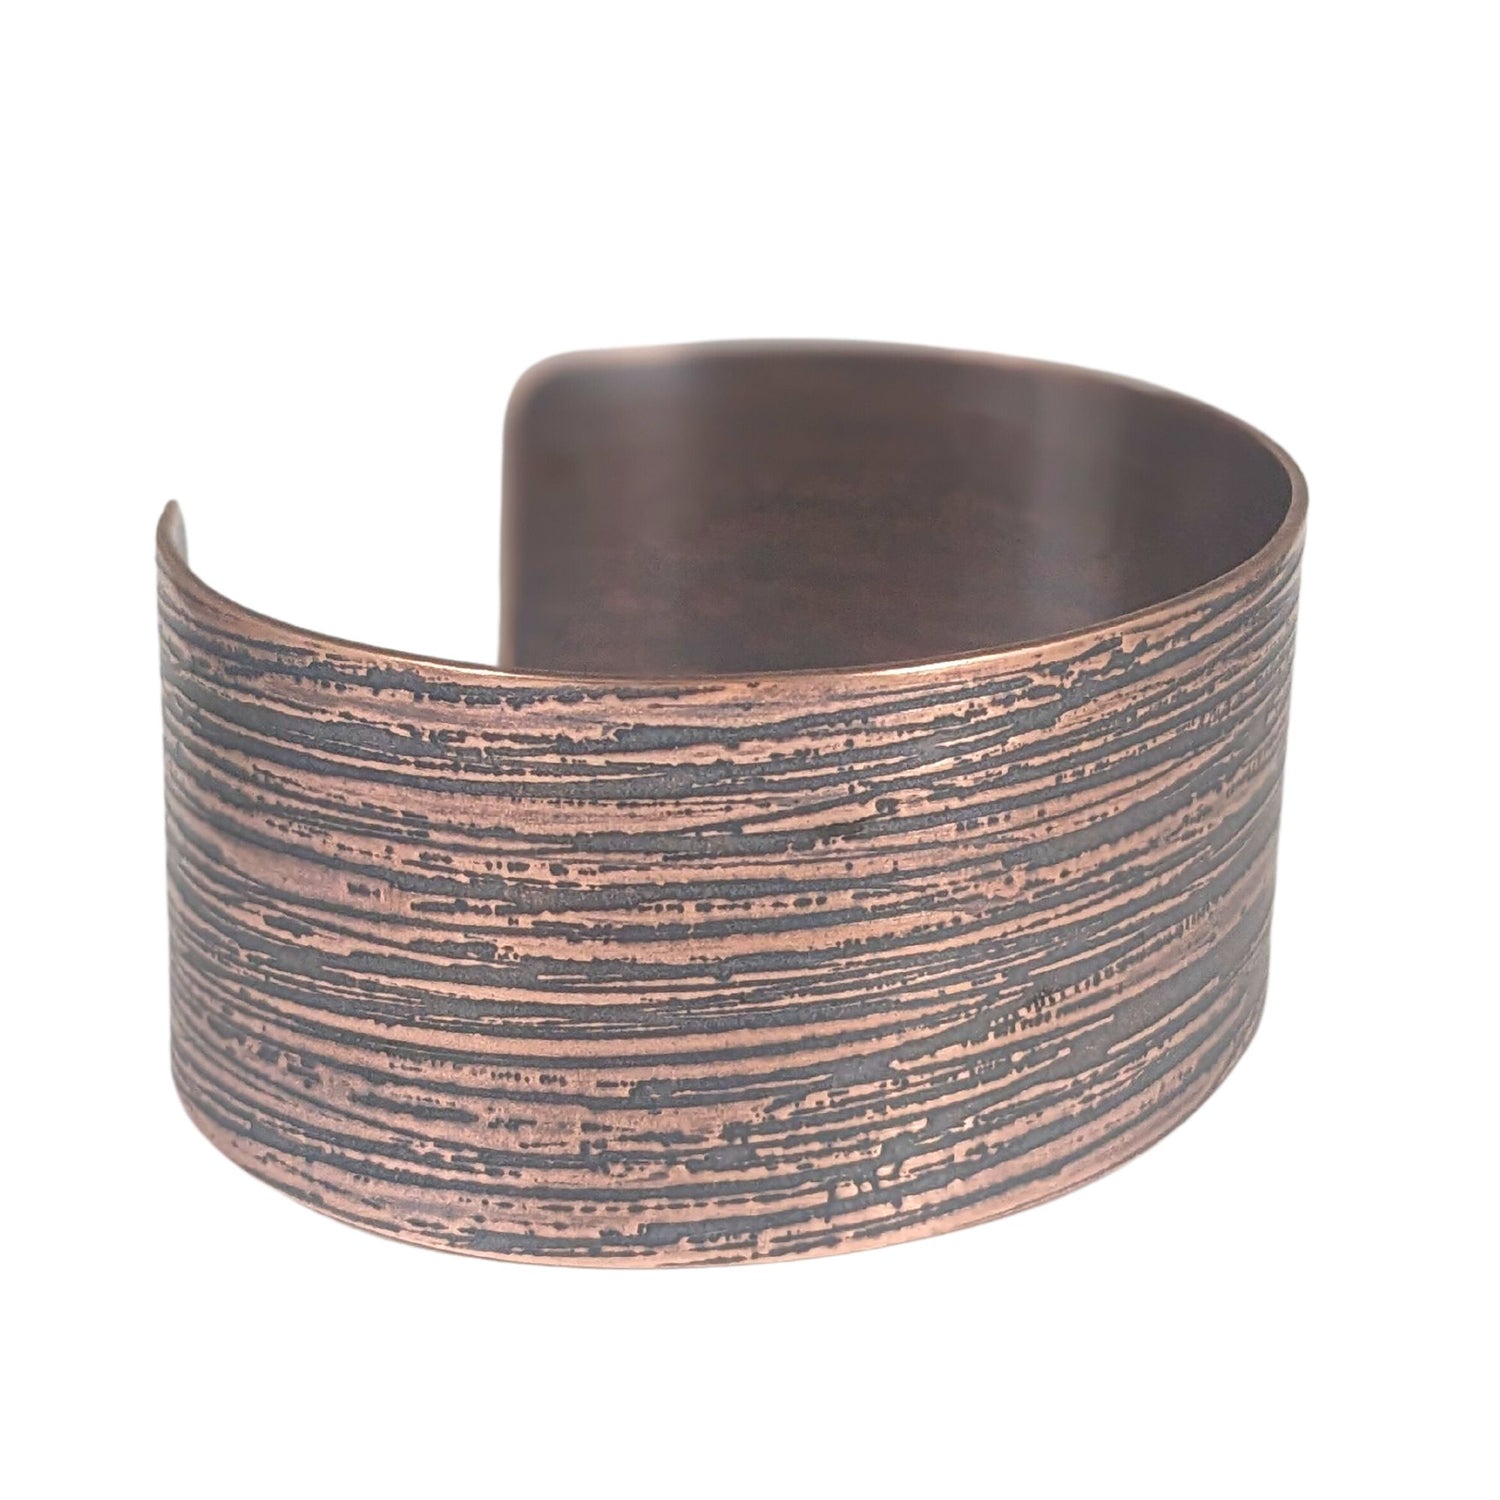 One inch wide copper cuff bracelet with an impressed texture that resembles raw silk fabric. The texture is horizontal and covers the entire cuff.